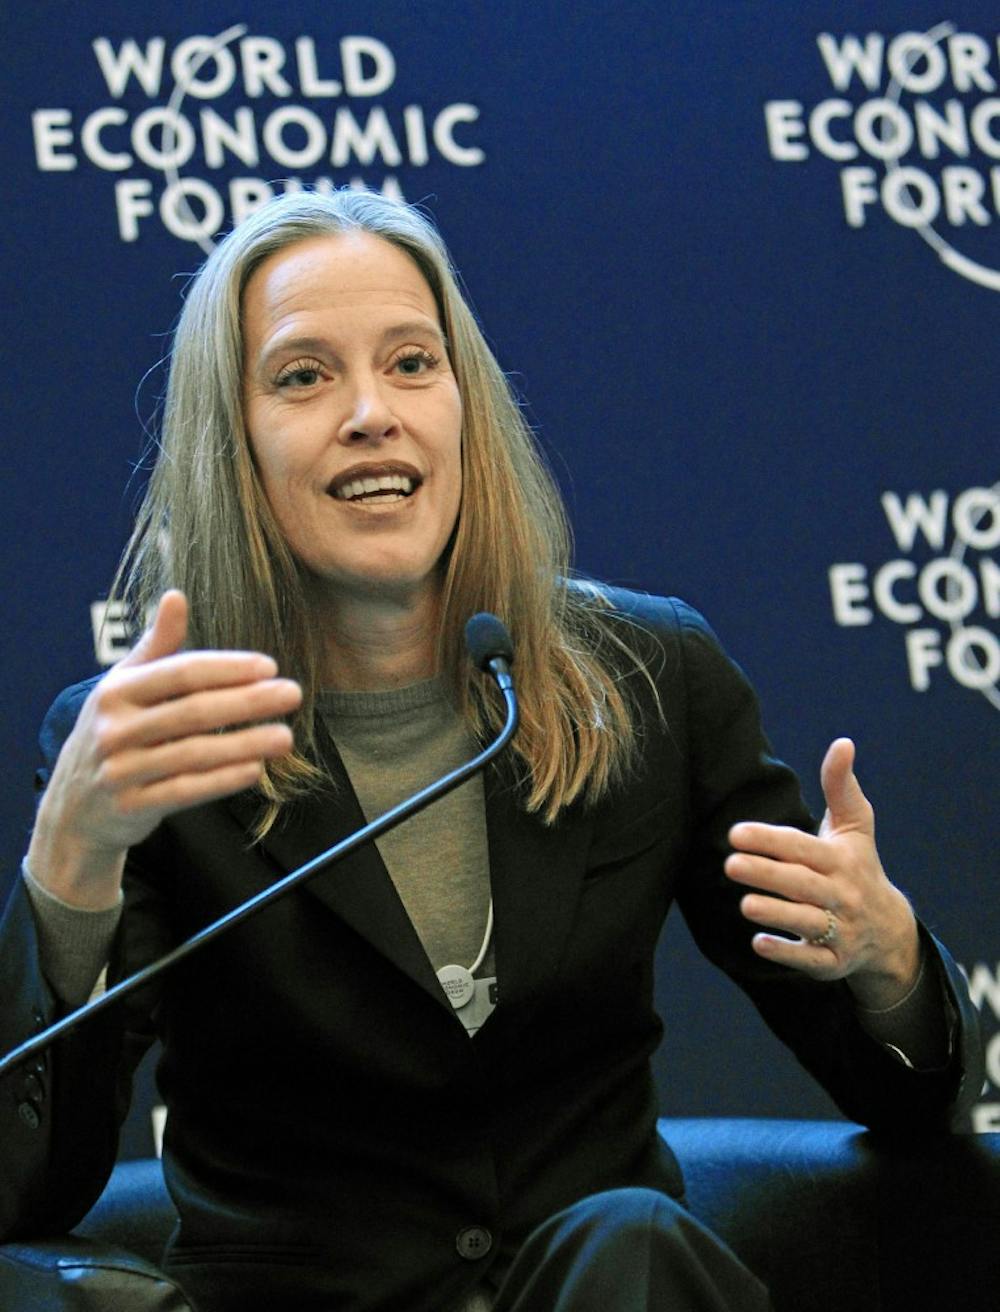 <h5>Wendy Kopp speaks at the Annual Meeting 2012 of the World Economic Forum in Davos, Switzerland, on January 26, 2012.</h5>
<h6>“Wendy Kopp - World Economic Forum Annual Meeting 2012” by Sebastian Derungs / <a href="https://www.flickr.com/photos/15237218@N00/6766135003" target="_self">CC BY-SA 2.0</a></h6>